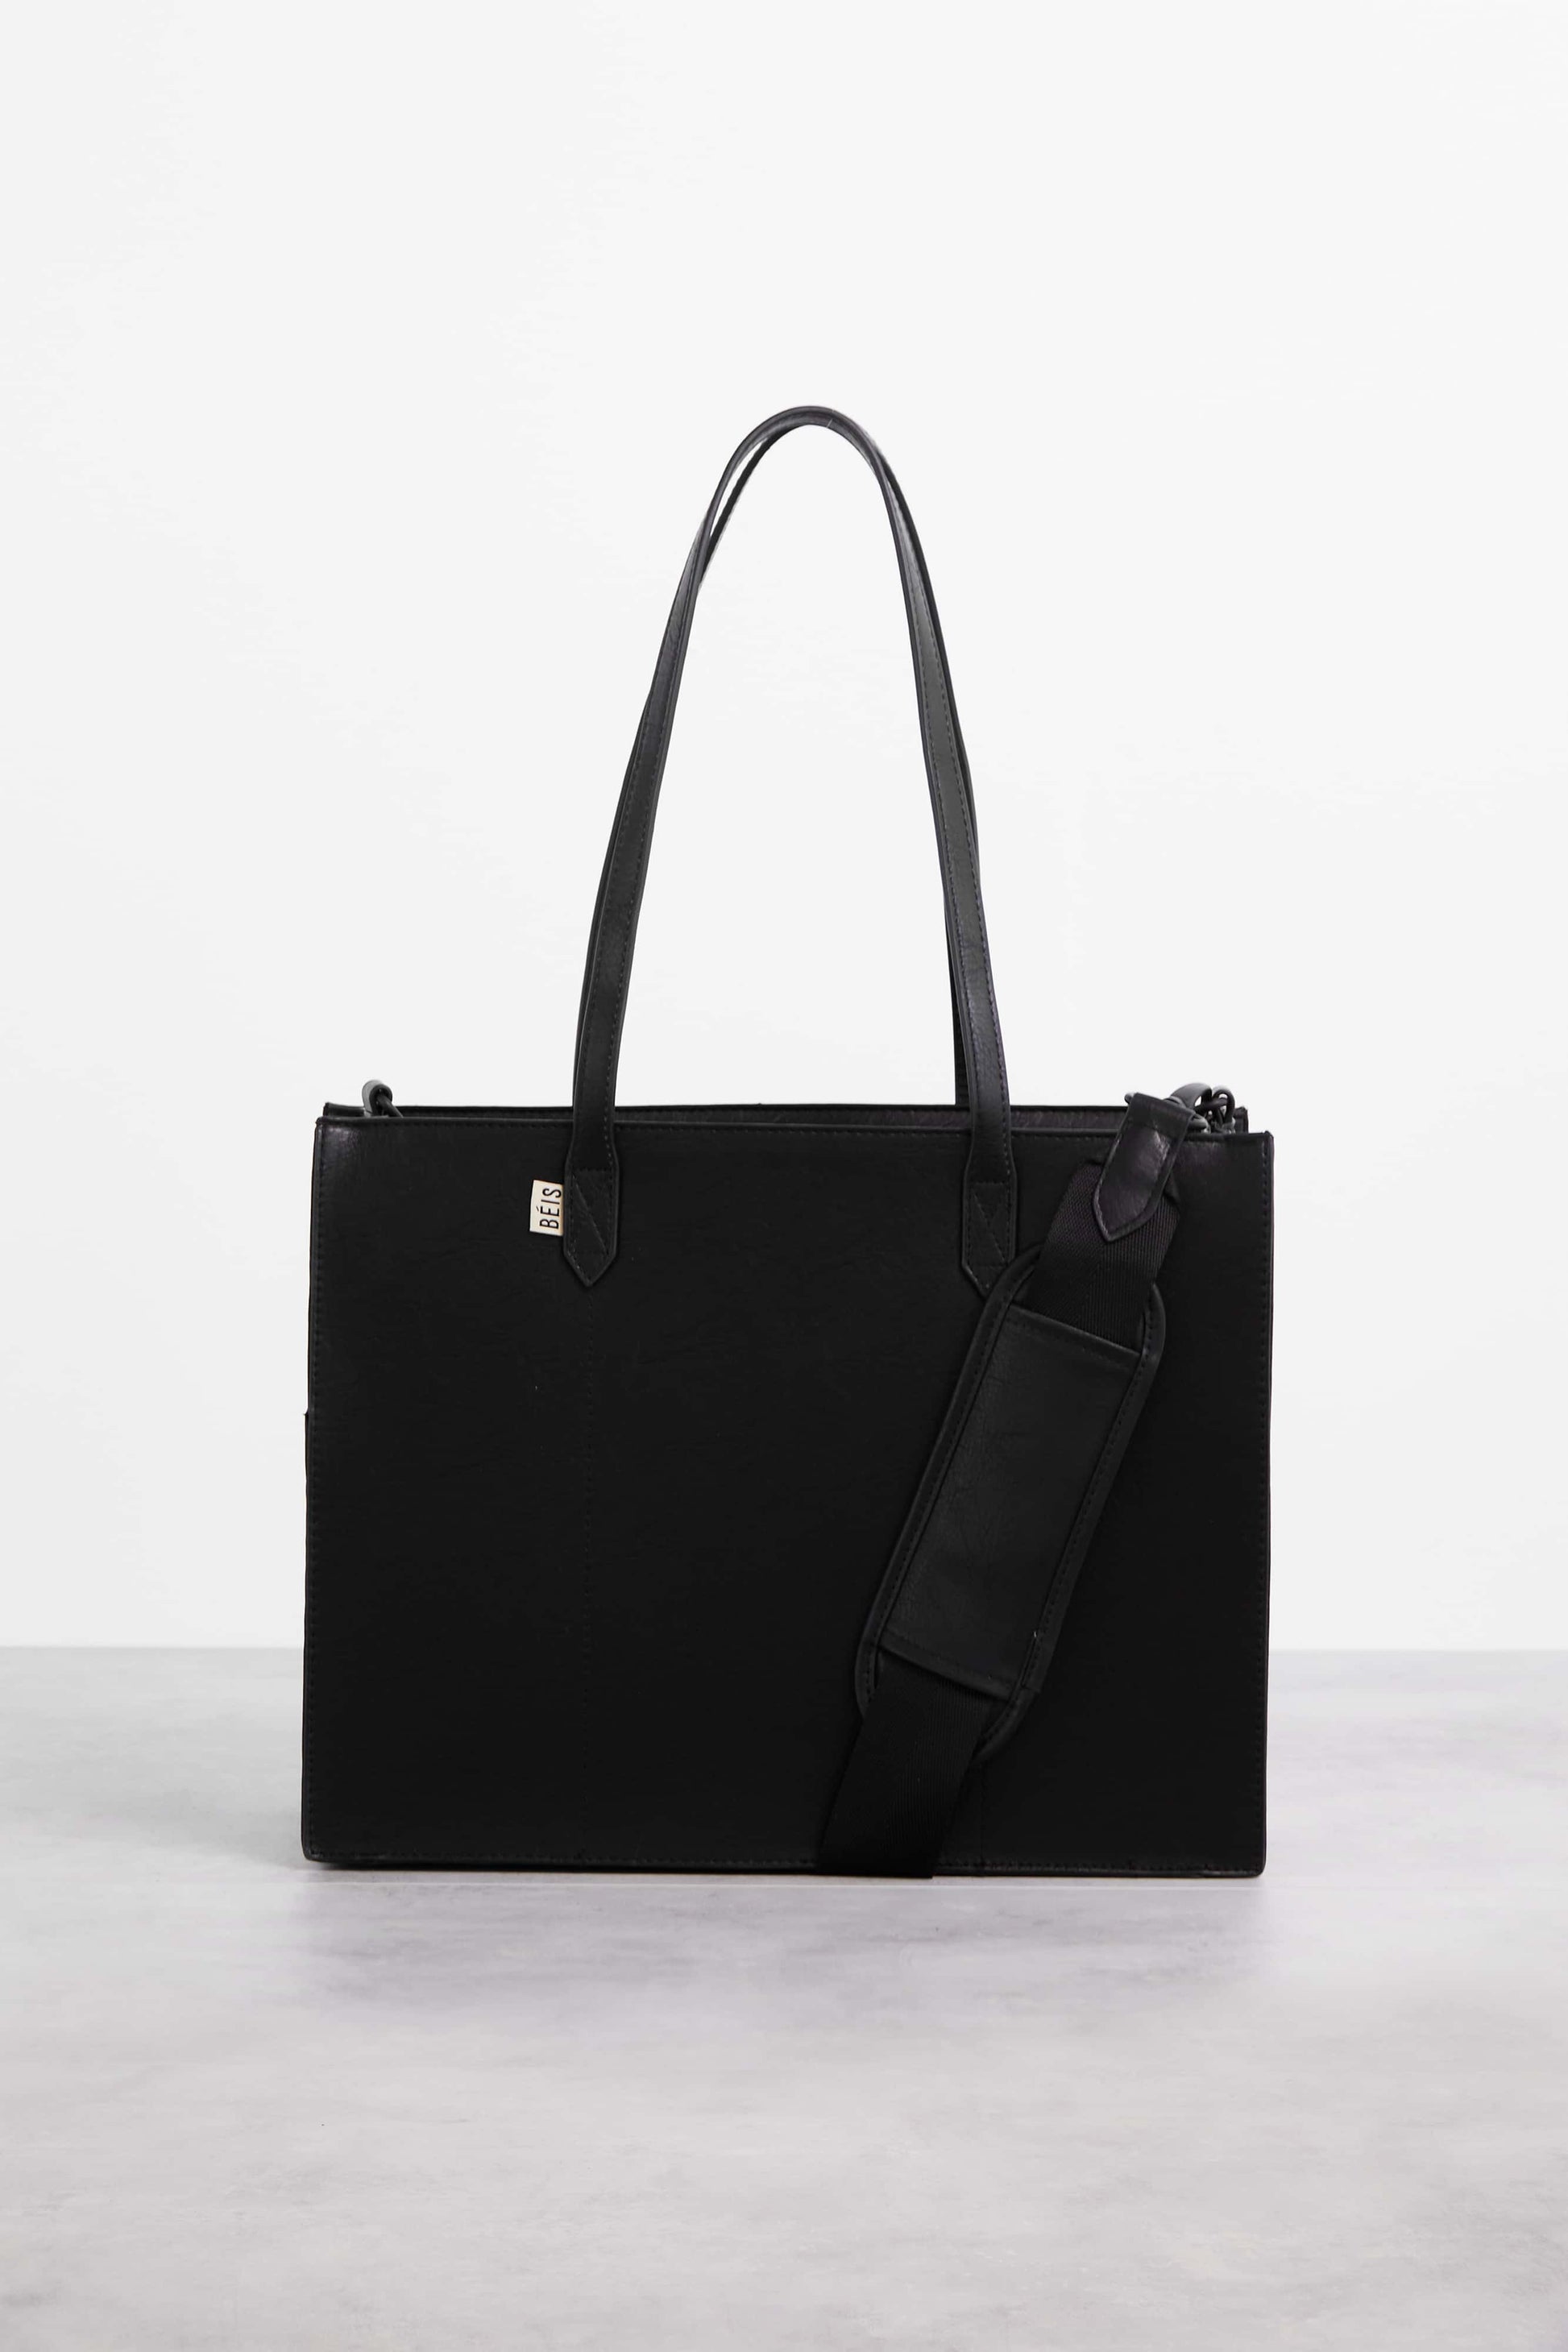 Black Leather Executive Office Bag, Capacity: 4 Kg